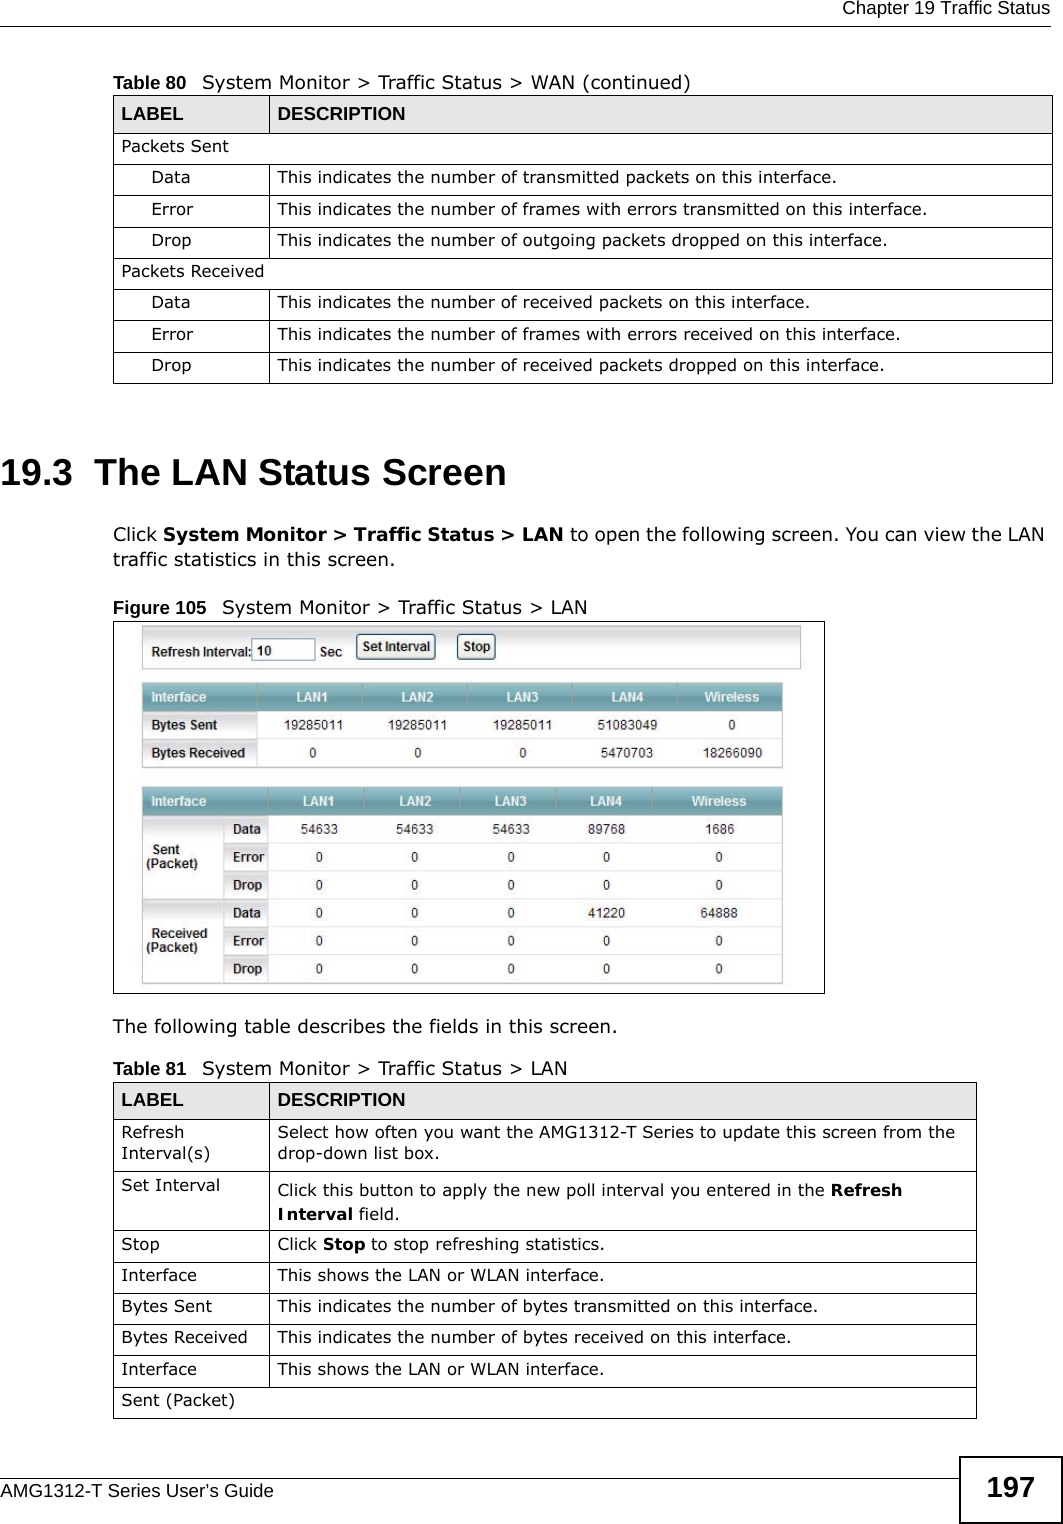  Chapter 19 Traffic StatusAMG1312-T Series User’s Guide 19719.3  The LAN Status ScreenClick System Monitor &gt; Traffic Status &gt; LAN to open the following screen. You can view the LAN traffic statistics in this screen.Figure 105   System Monitor &gt; Traffic Status &gt; LANThe following table describes the fields in this screen.   Packets Sent Data  This indicates the number of transmitted packets on this interface.Error This indicates the number of frames with errors transmitted on this interface.Drop This indicates the number of outgoing packets dropped on this interface.Packets ReceivedData  This indicates the number of received packets on this interface.Error This indicates the number of frames with errors received on this interface.Drop This indicates the number of received packets dropped on this interface.Table 80   System Monitor &gt; Traffic Status &gt; WAN (continued)LABEL DESCRIPTIONTable 81   System Monitor &gt; Traffic Status &gt; LANLABEL DESCRIPTIONRefresh Interval(s)Select how often you want the AMG1312-T Series to update this screen from the drop-down list box.Set Interval Click this button to apply the new poll interval you entered in the Refresh Interval field.Stop Click Stop to stop refreshing statistics.Interface This shows the LAN or WLAN interface. Bytes Sent This indicates the number of bytes transmitted on this interface.Bytes Received This indicates the number of bytes received on this interface.Interface This shows the LAN or WLAN interface. Sent (Packet)  